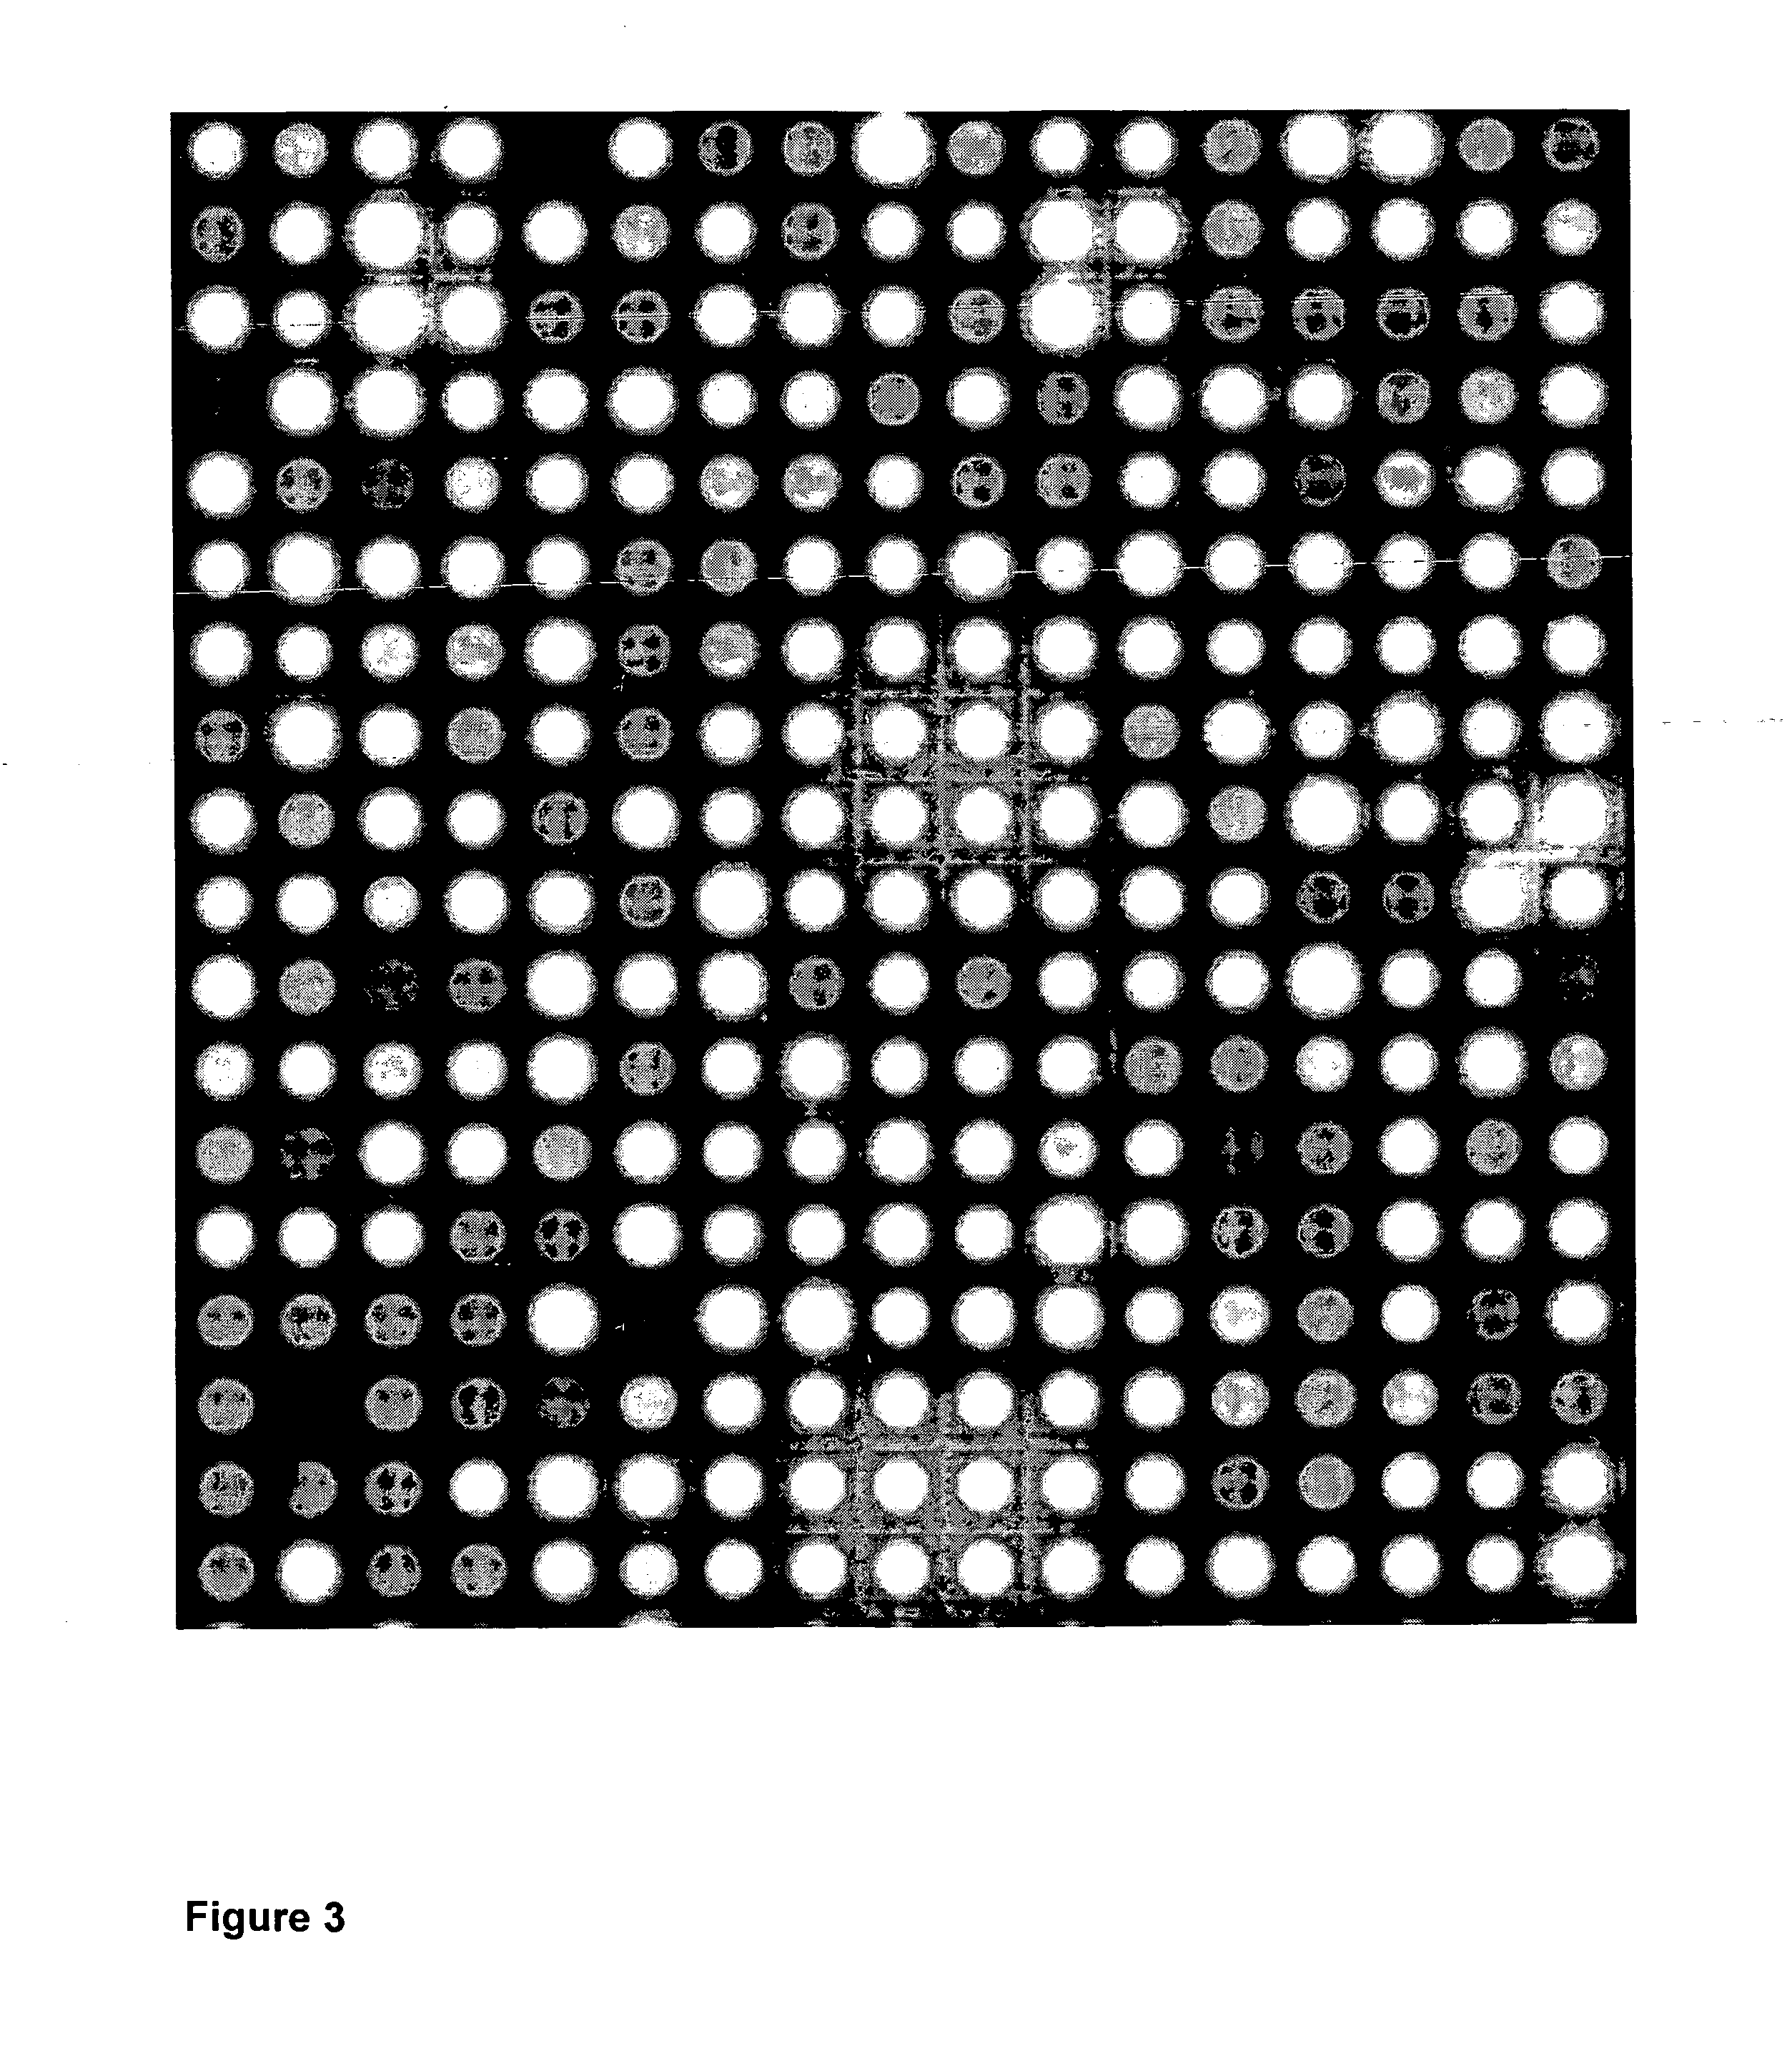 Electrochemical deblocking solution for electrochemical oligomer synthesis on an electrode array